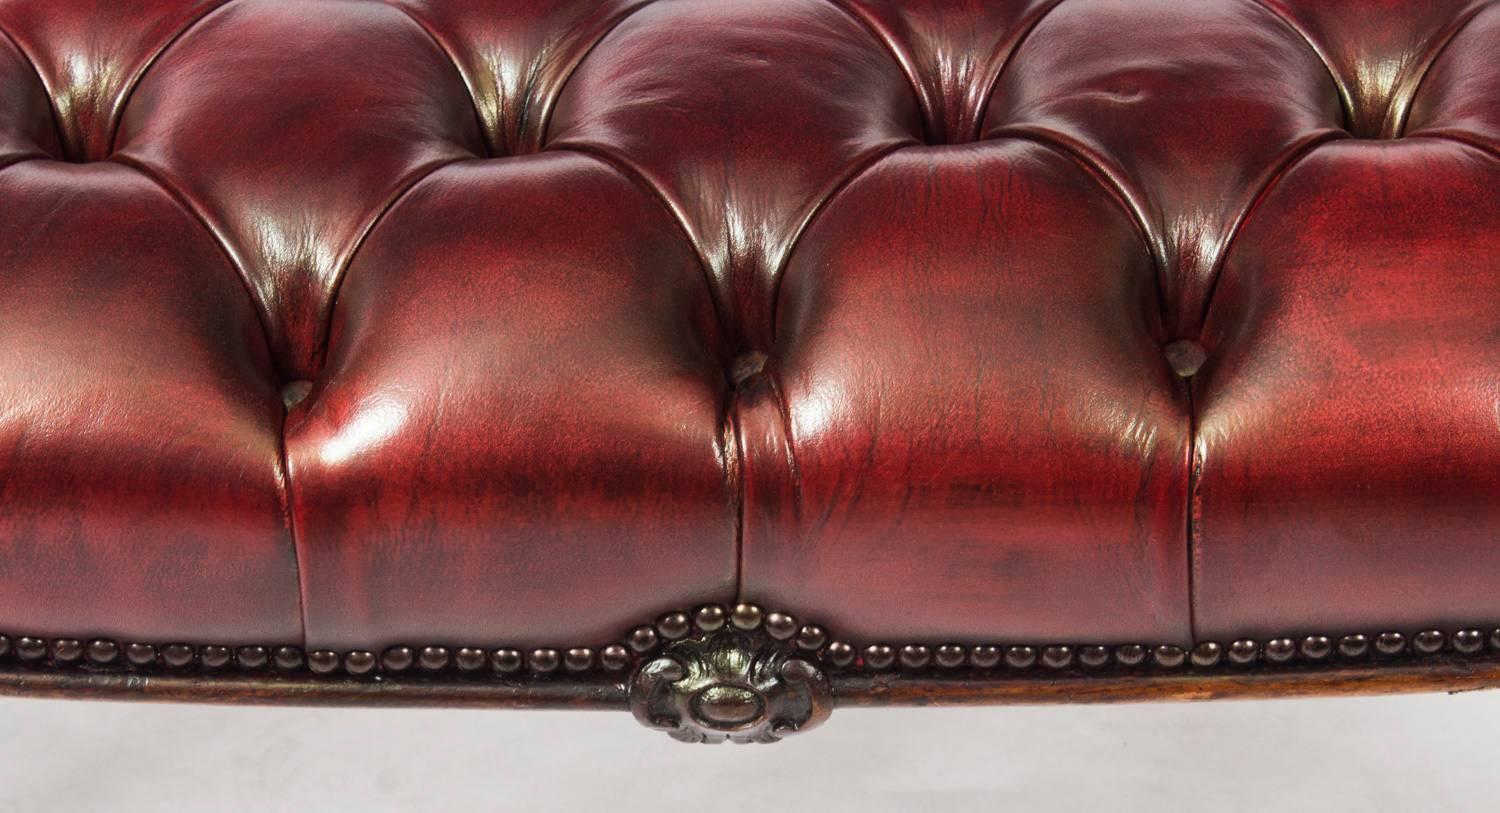 This is a very handsome antique Victorian mahogany buttoned leather stool, circa 1870 in date. 

It features sumptuous buttoned leather upholstery in a beautiful ox blood colour and is raised on four scroll carved cabrile legs.

Condition:
In